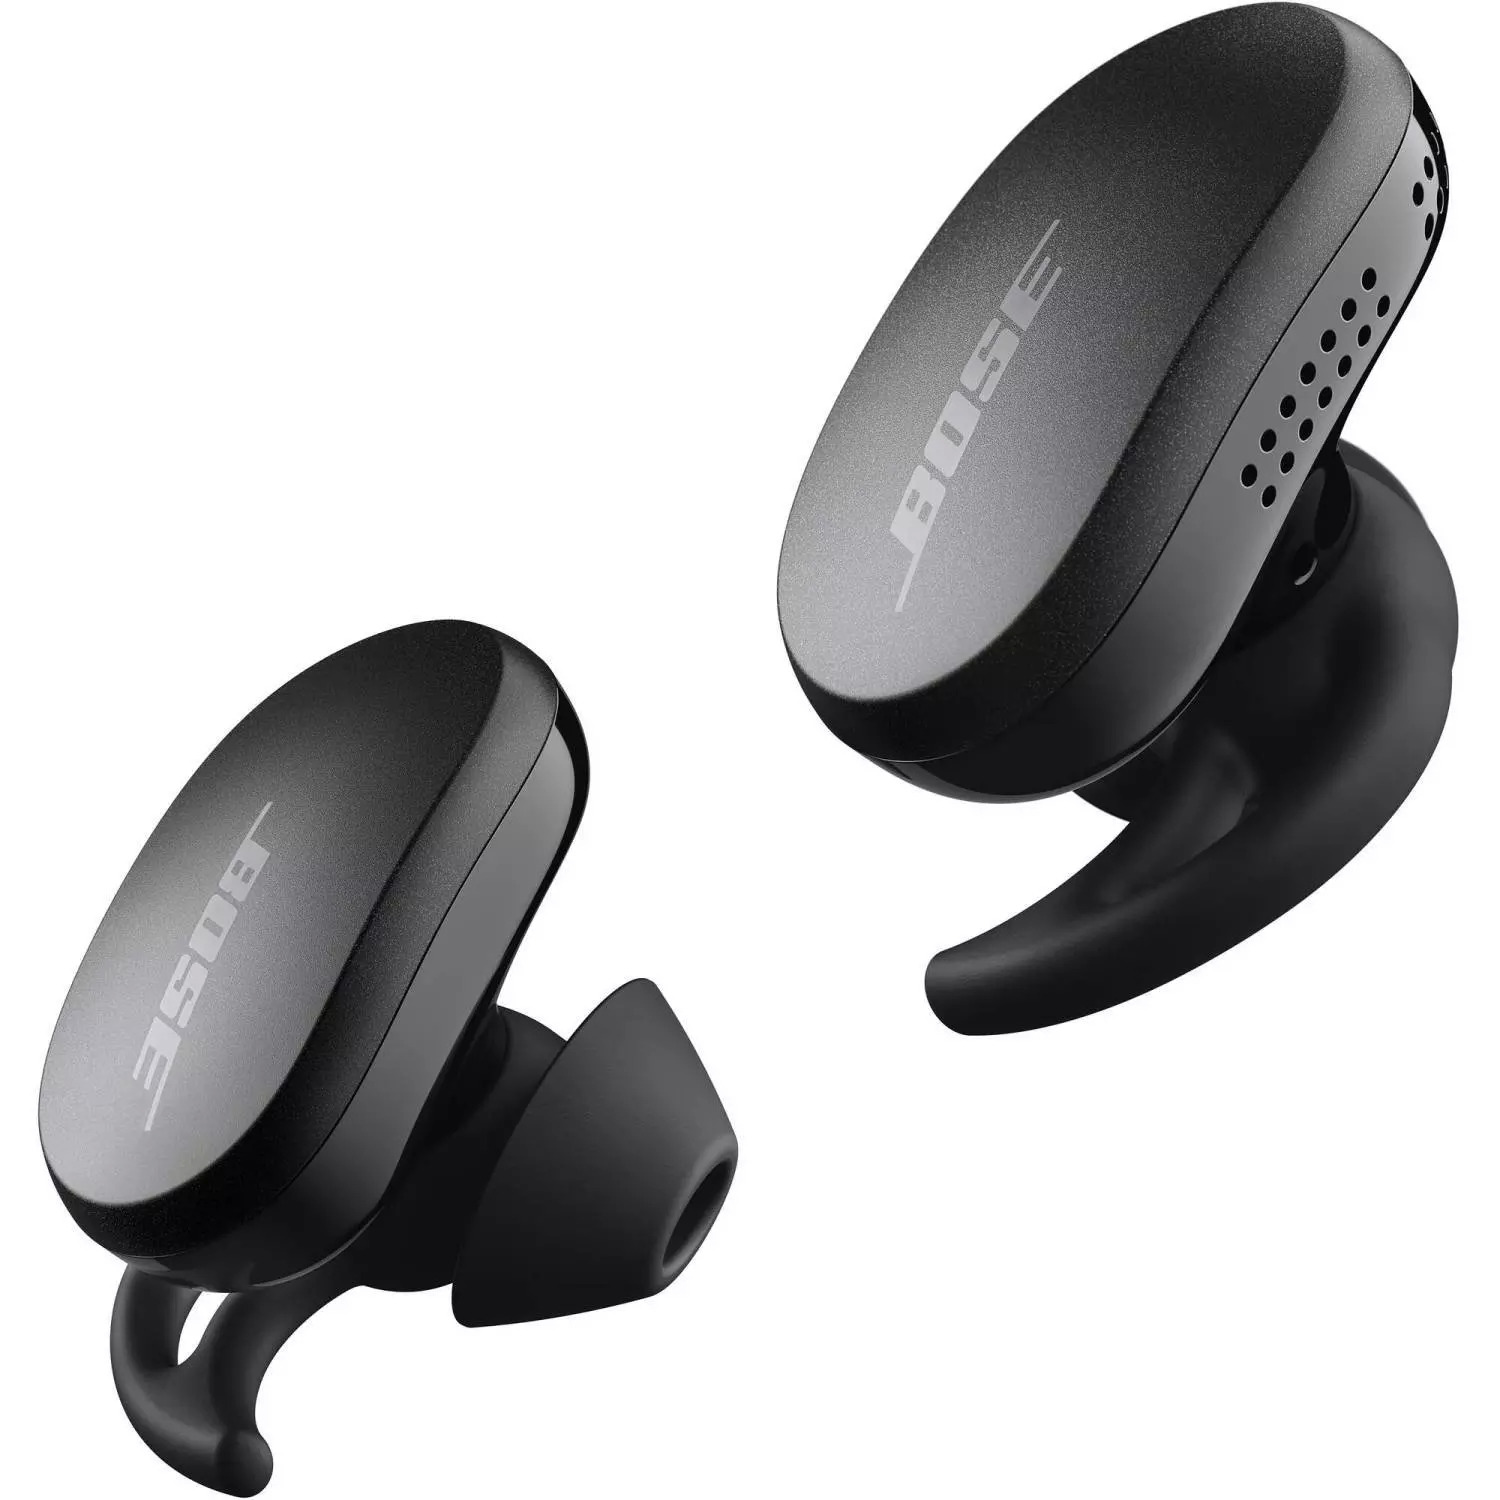 Bose QuietComfort Noise Cancelling Earbuds – True Wireless Earphones with Bluetooth (Refurbished) - $129.59